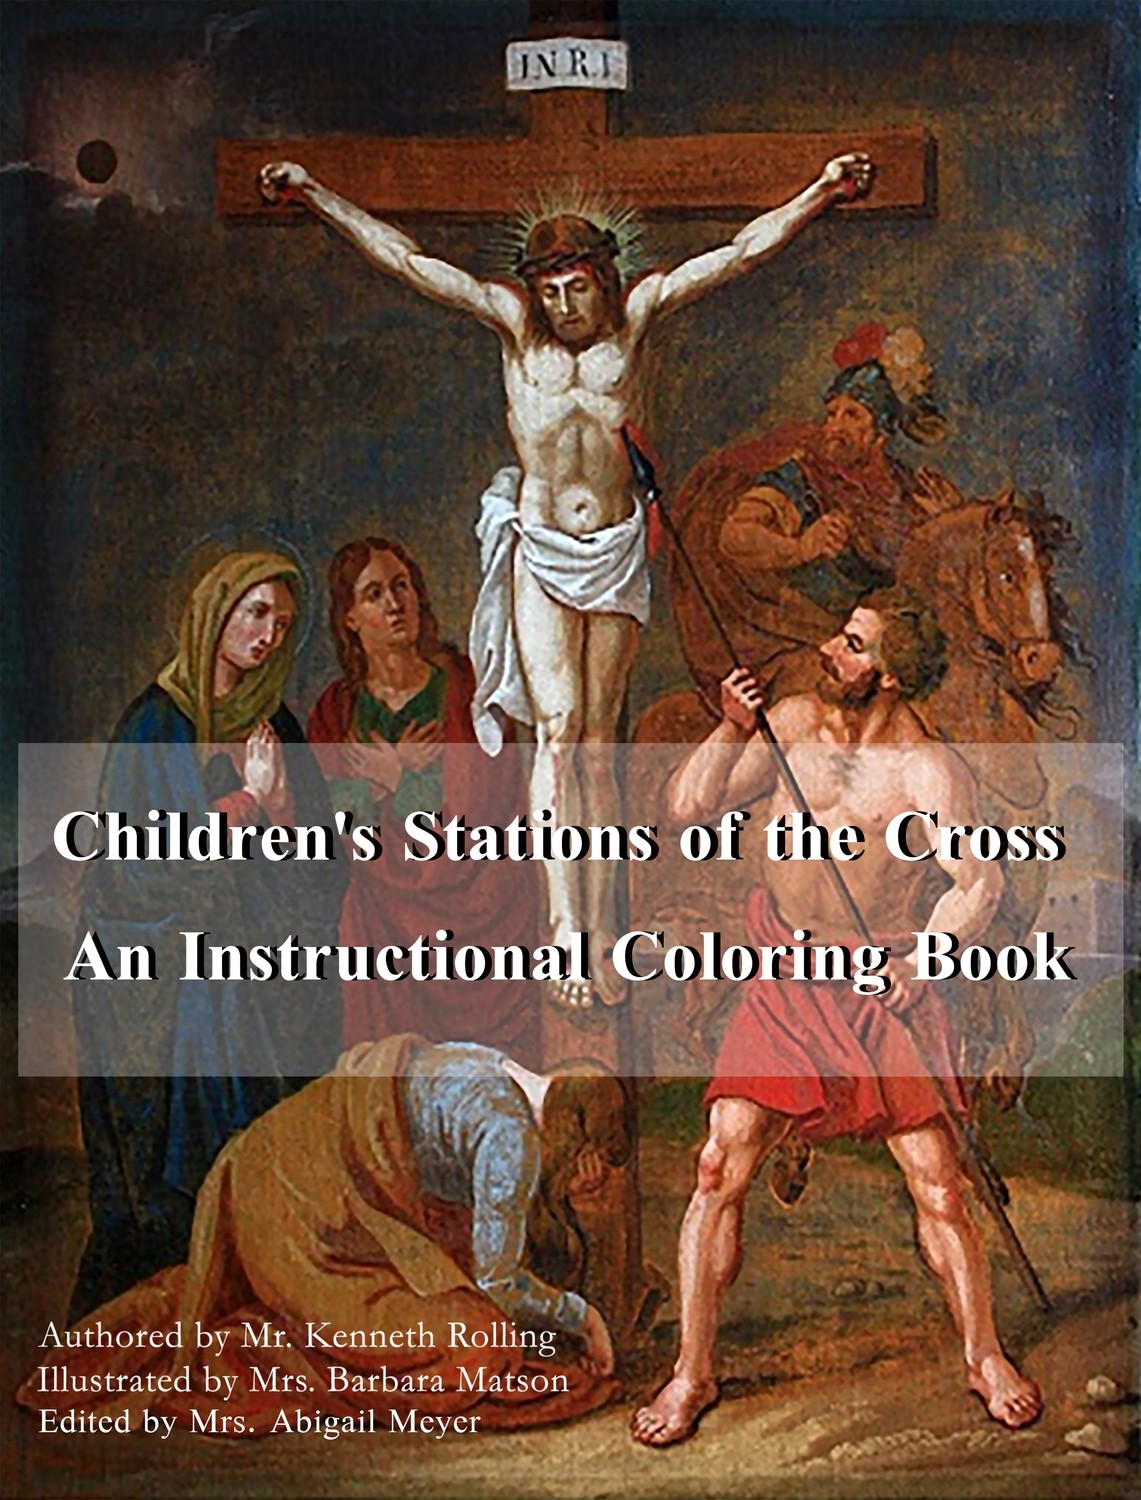 Children's Stations of the Cross: Instructional Coloring Book